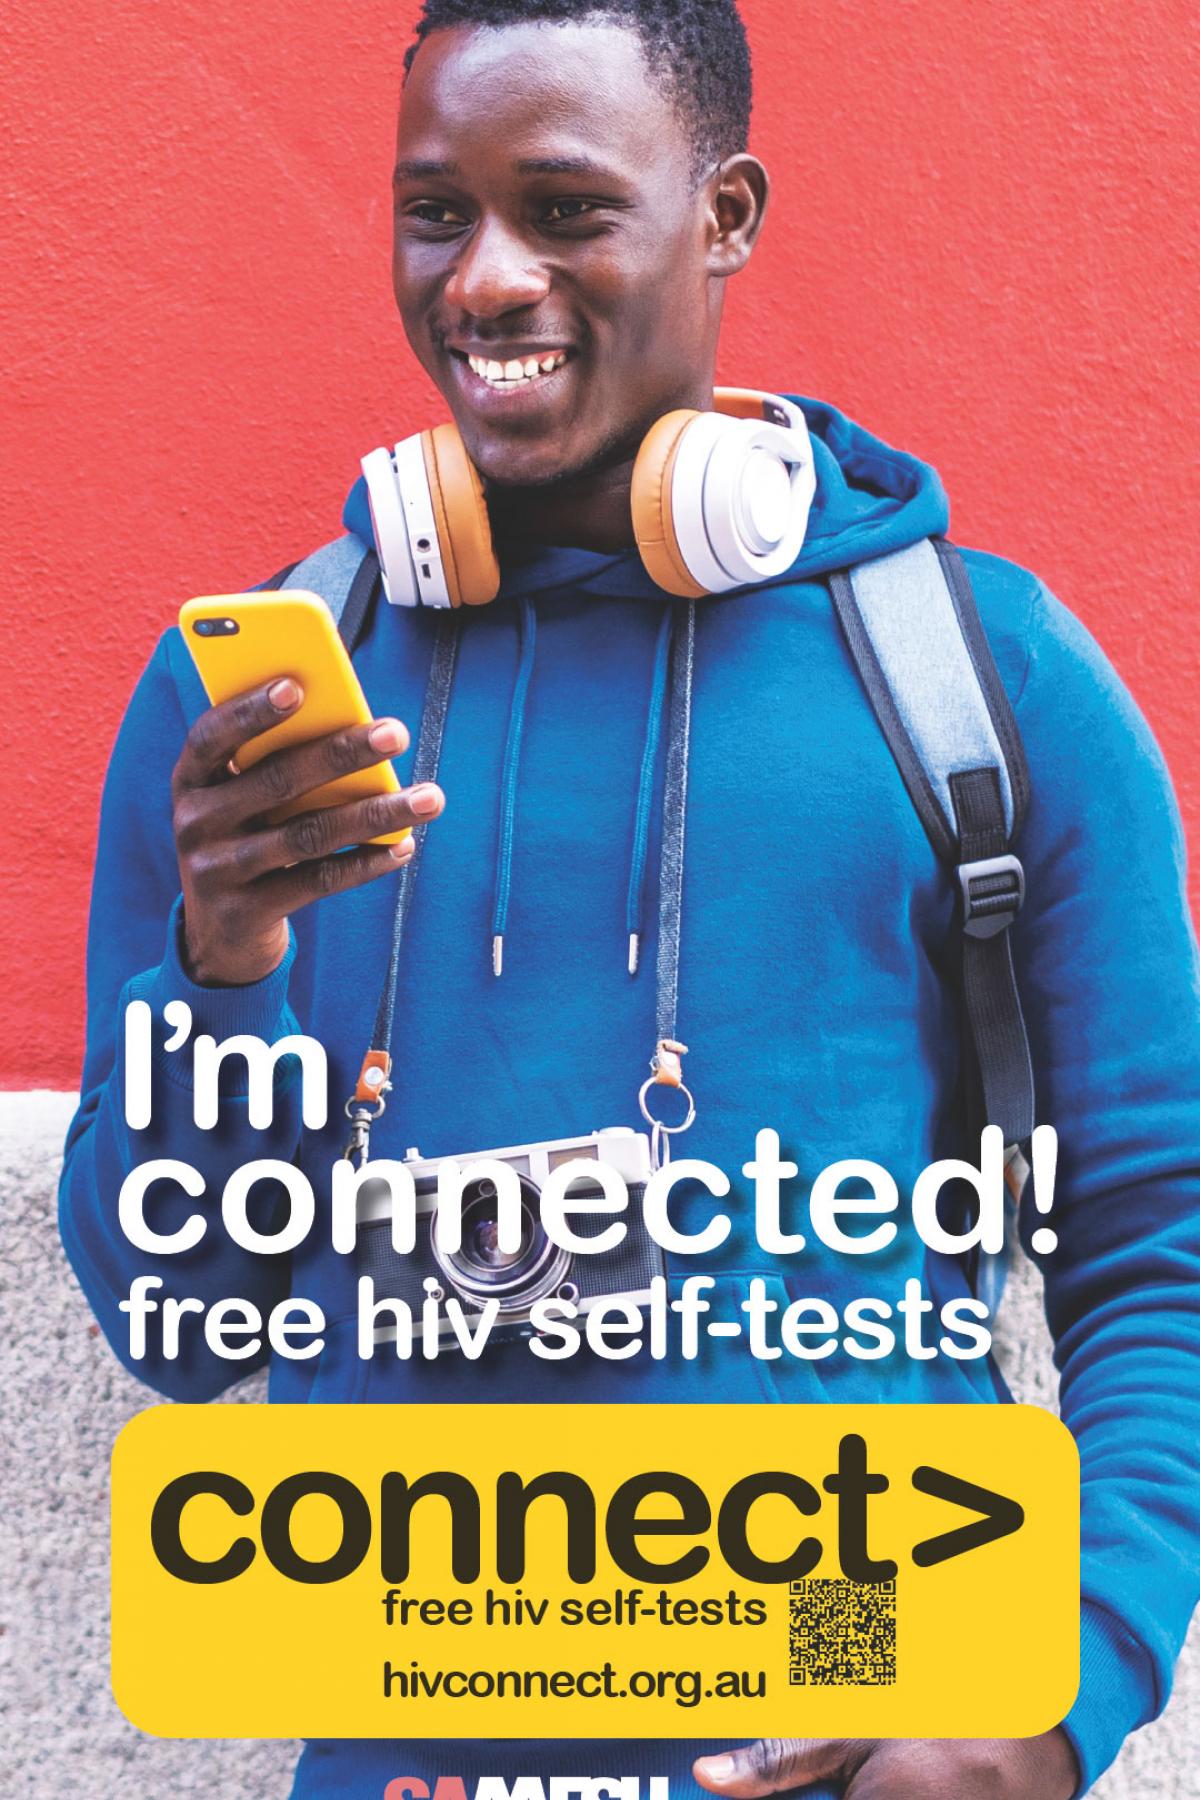 Young person holding a phone and smiling with text "I'm connected, free HIV self tests" plus QR code to SAMESH and CONNECT website